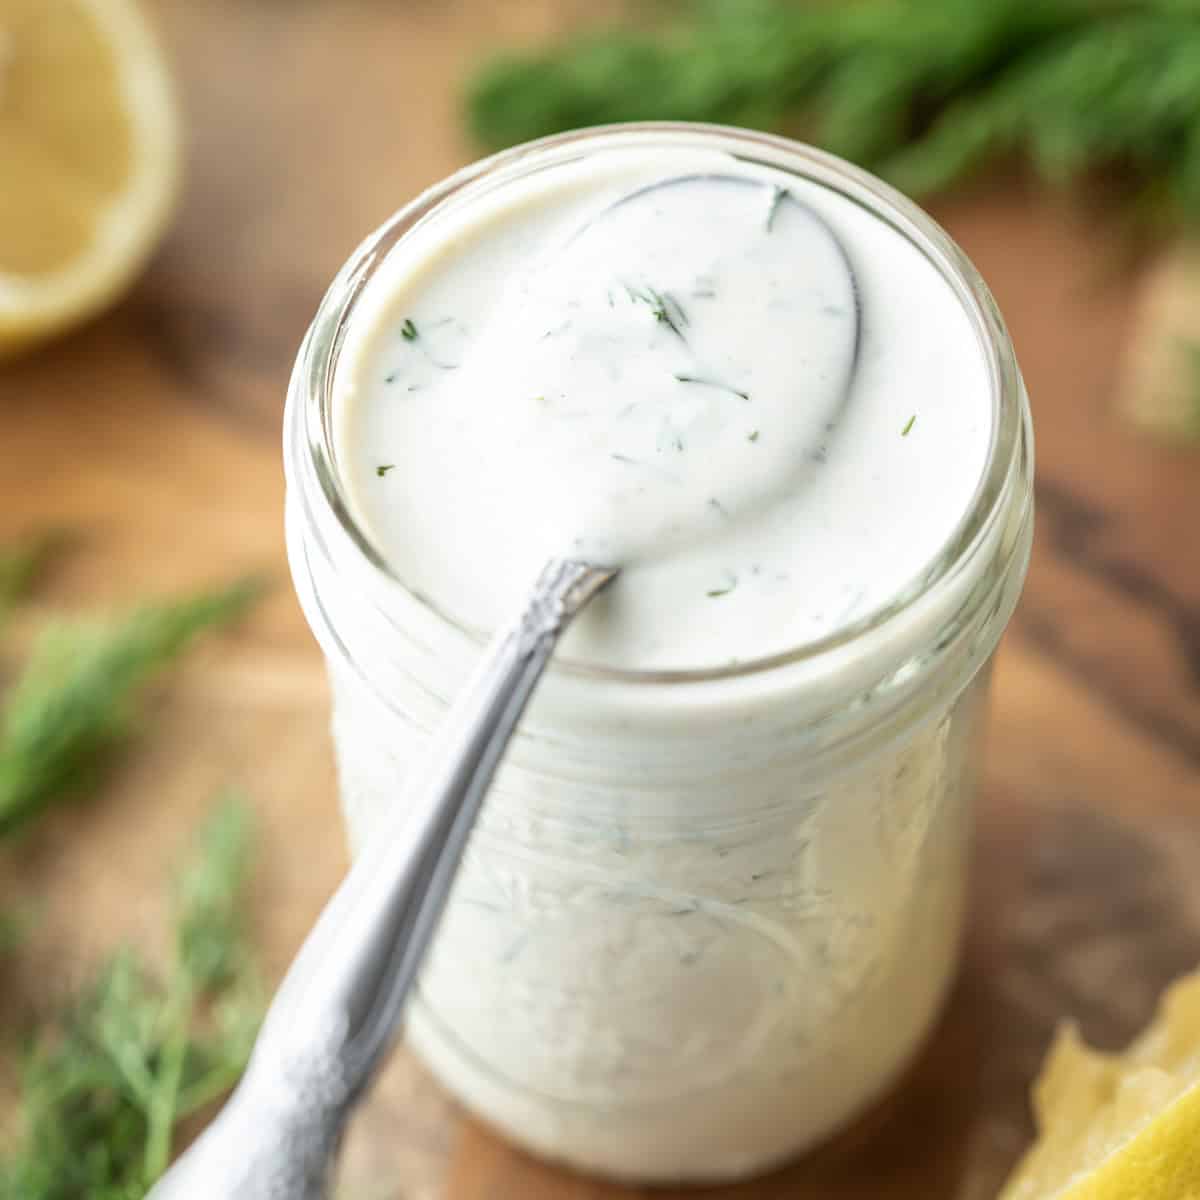 A glass jar filled with creamy dill dressing made with plant-based ingredients and no oil.